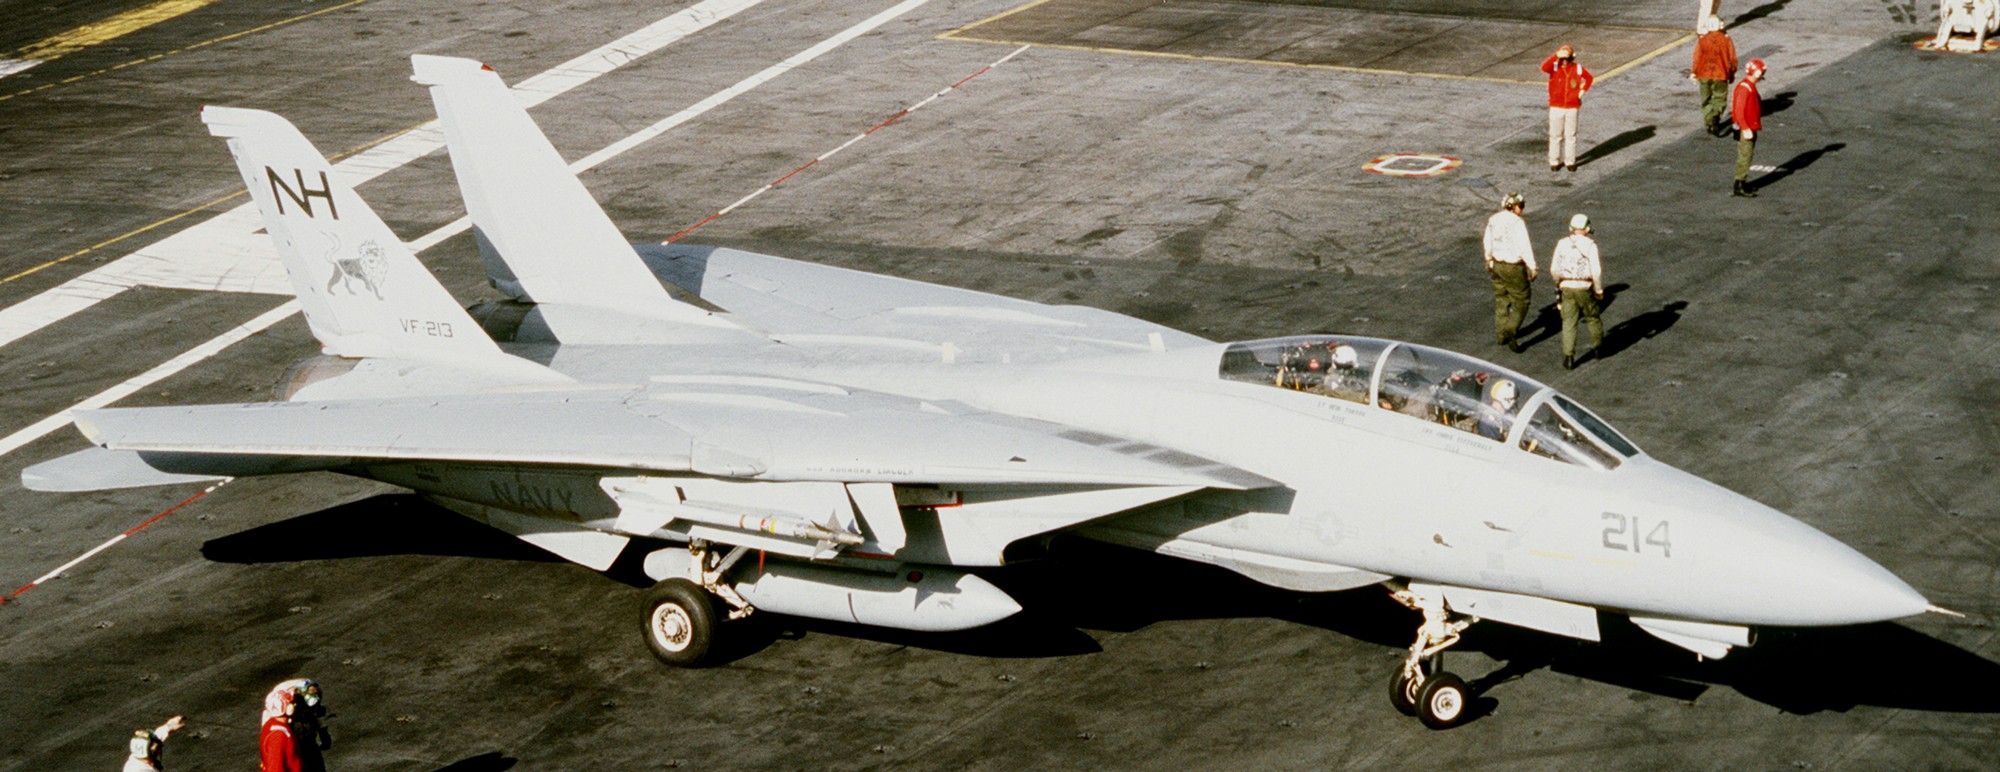 vf-213 black lions fighter squadron us navy f-14a tomcat carrier air wing cvw-11 uss abraham lincoln cvn-72 65